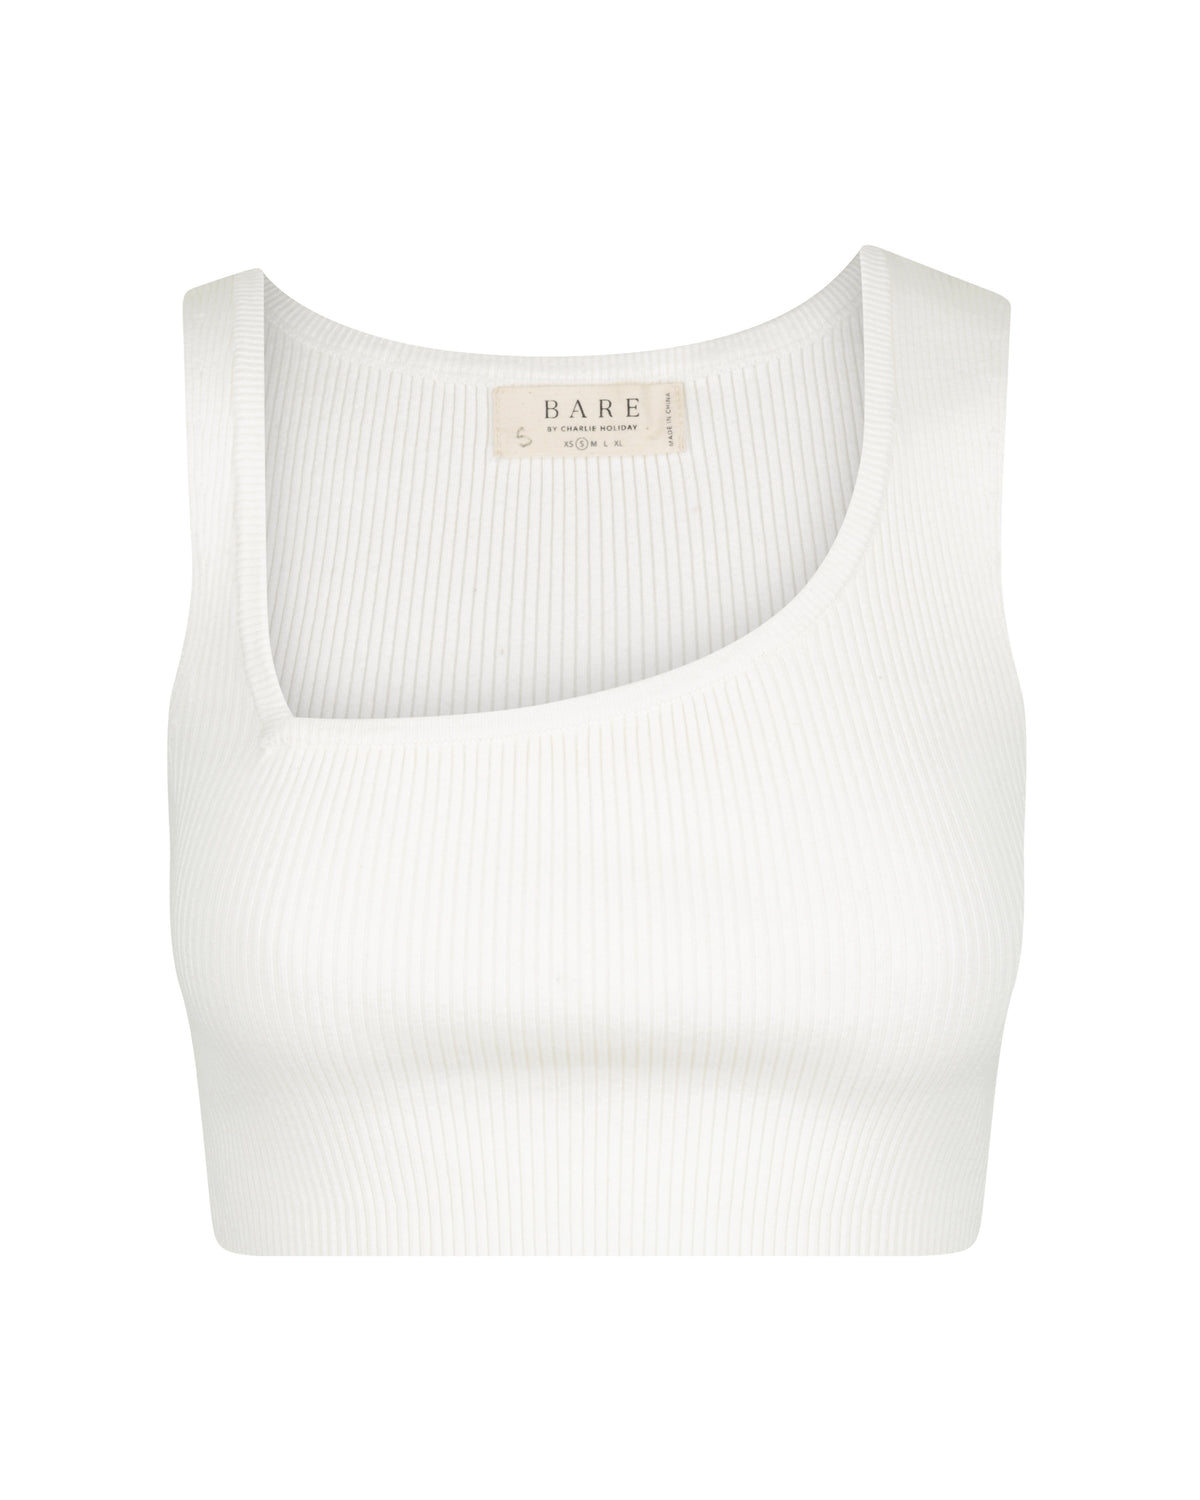 The Asymetrical Crop Top